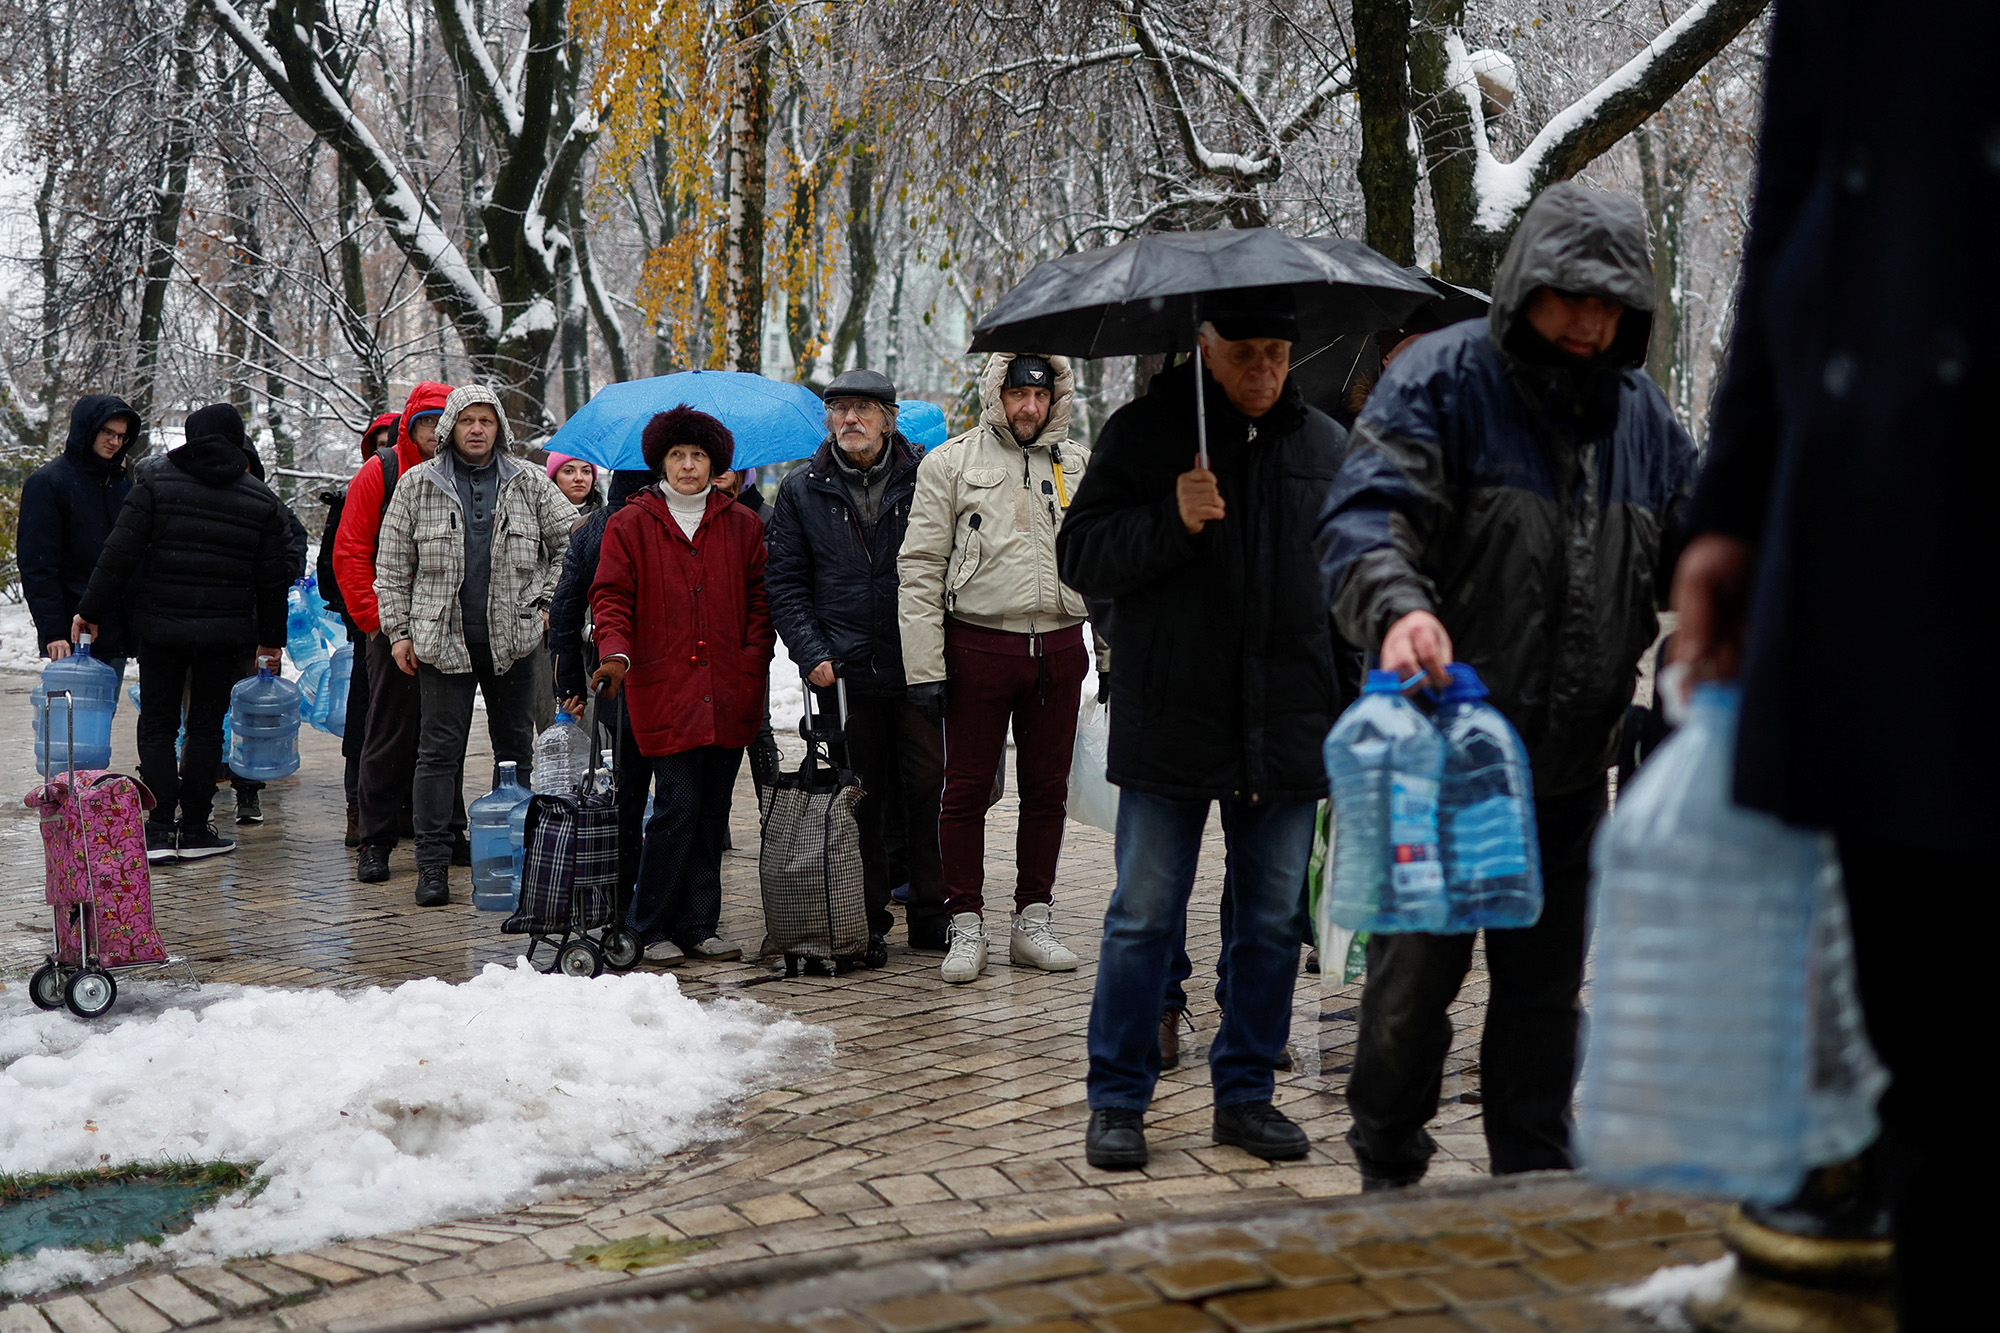 Local residents stand in line to fill up bottles with fresh drinking water in Kyiv, Ukraine, on November 24.